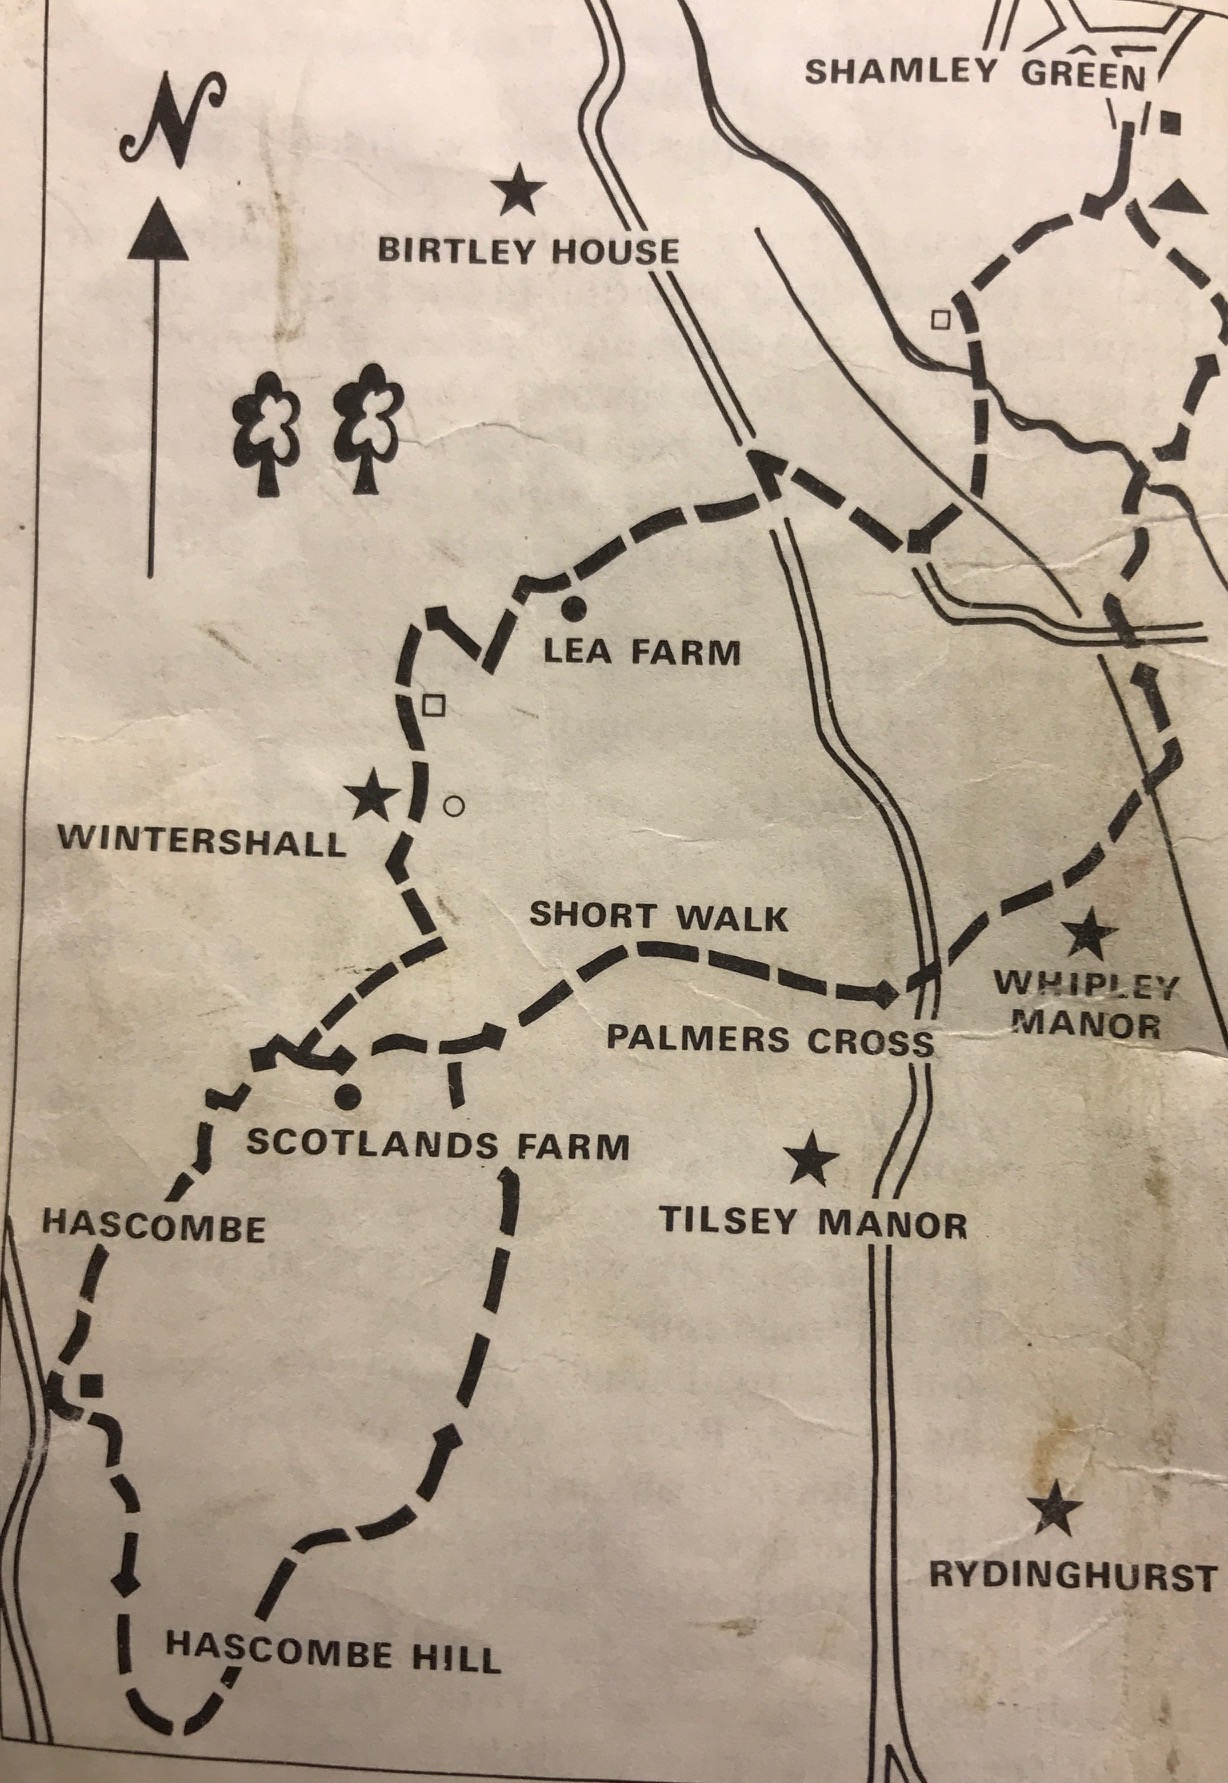 Wintershall Manor: Walk 1, text and map.